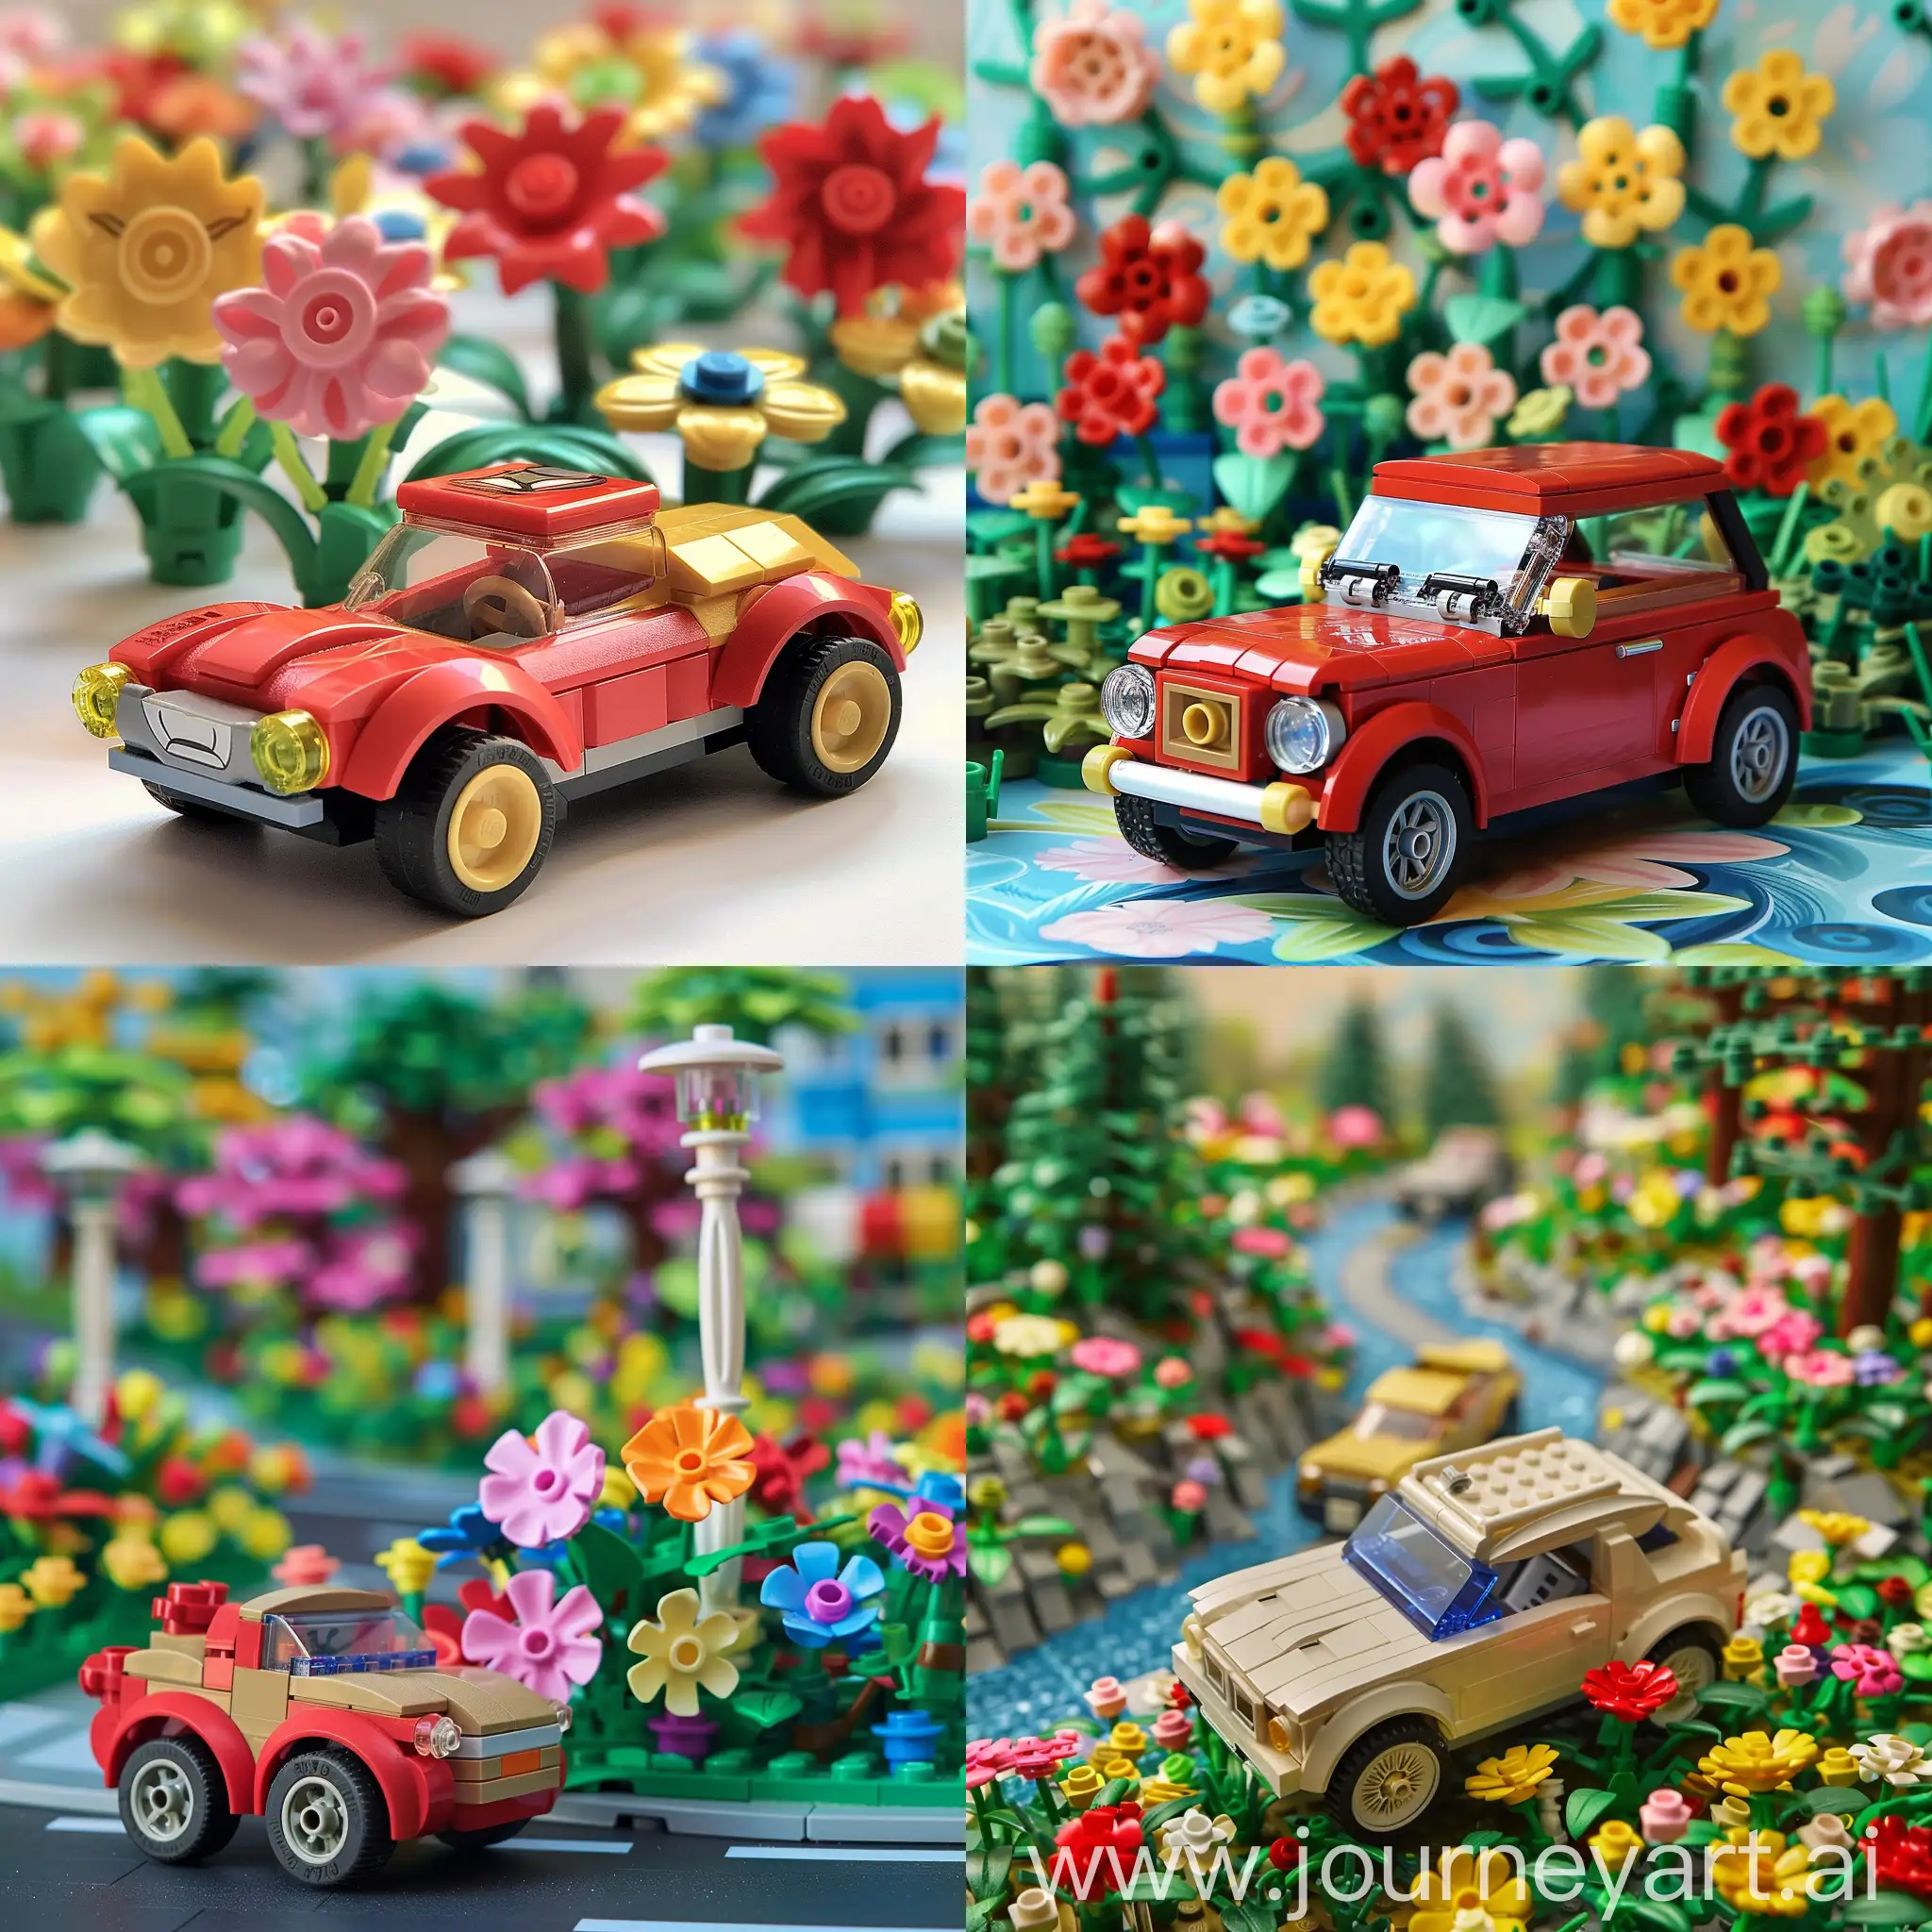 Create photo concept decoration beautiful for instagram acount that sell lego flowers and lego cars. Create on level of best instagram accounts shops. Like whole page - actuals, bio, posts in what style. Use DALLE and try your best so we can become best instagram account ever